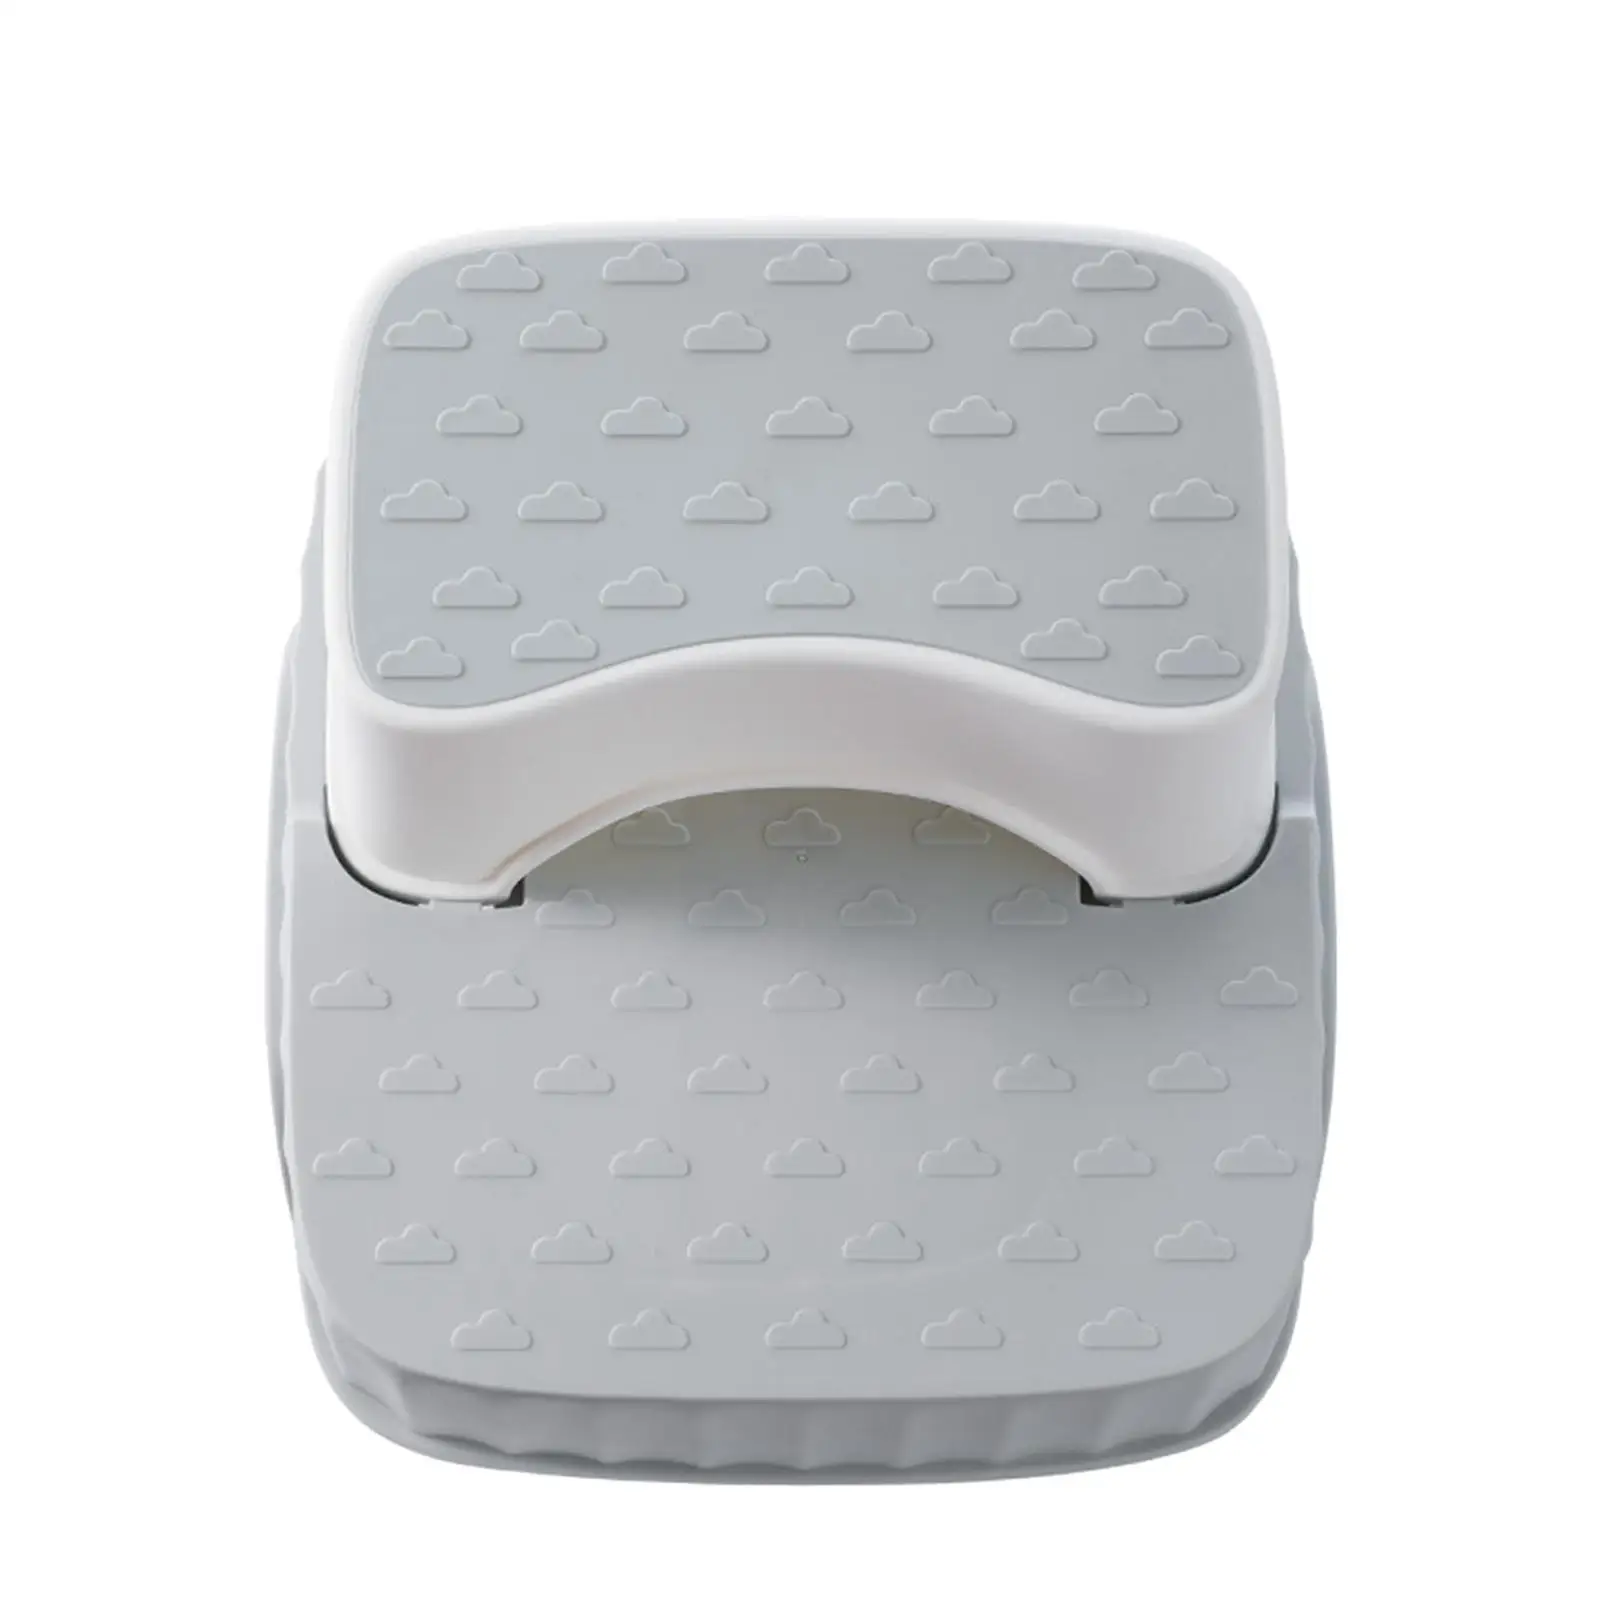 Compact Toilet Stool Bathroom Supplies Foot Rest Cushion Bedside Step Stool Non Skid Foot Stool for Home Bathroom Holiday Gifts